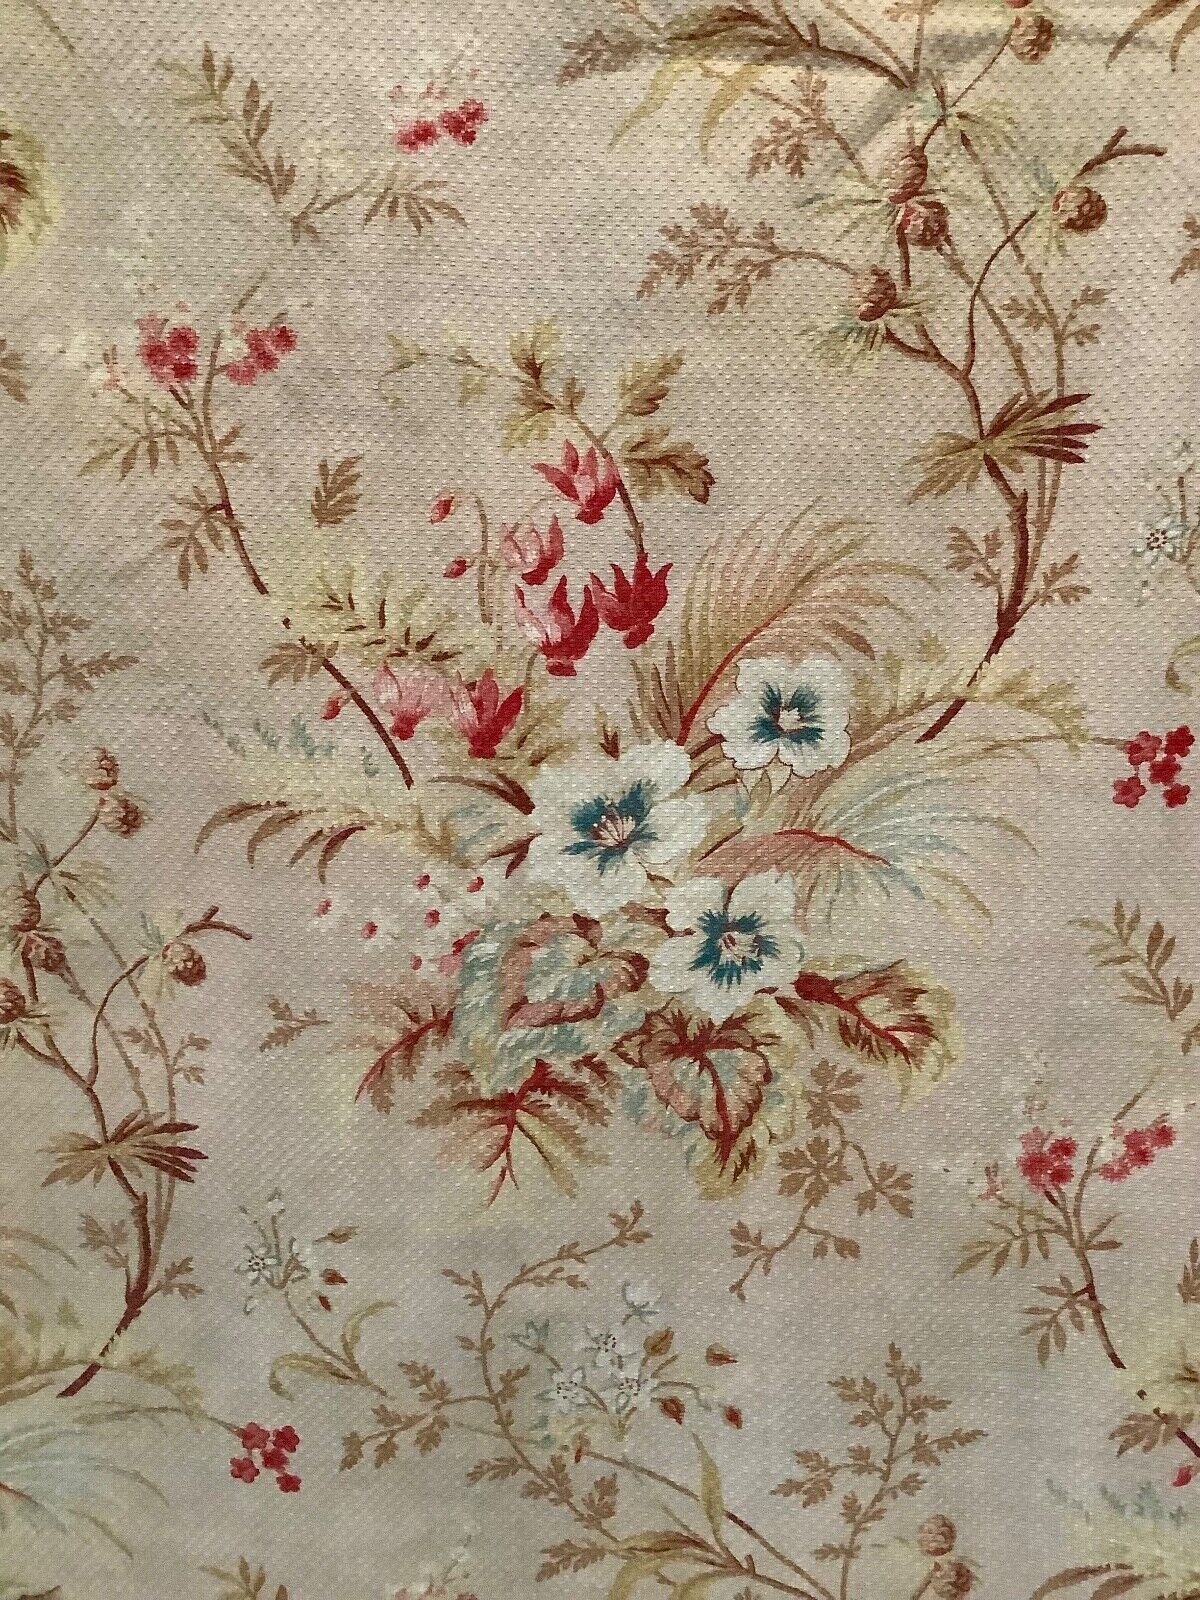 Delightful Antique French Floral Cotton Textured Fabric Shabby Chic